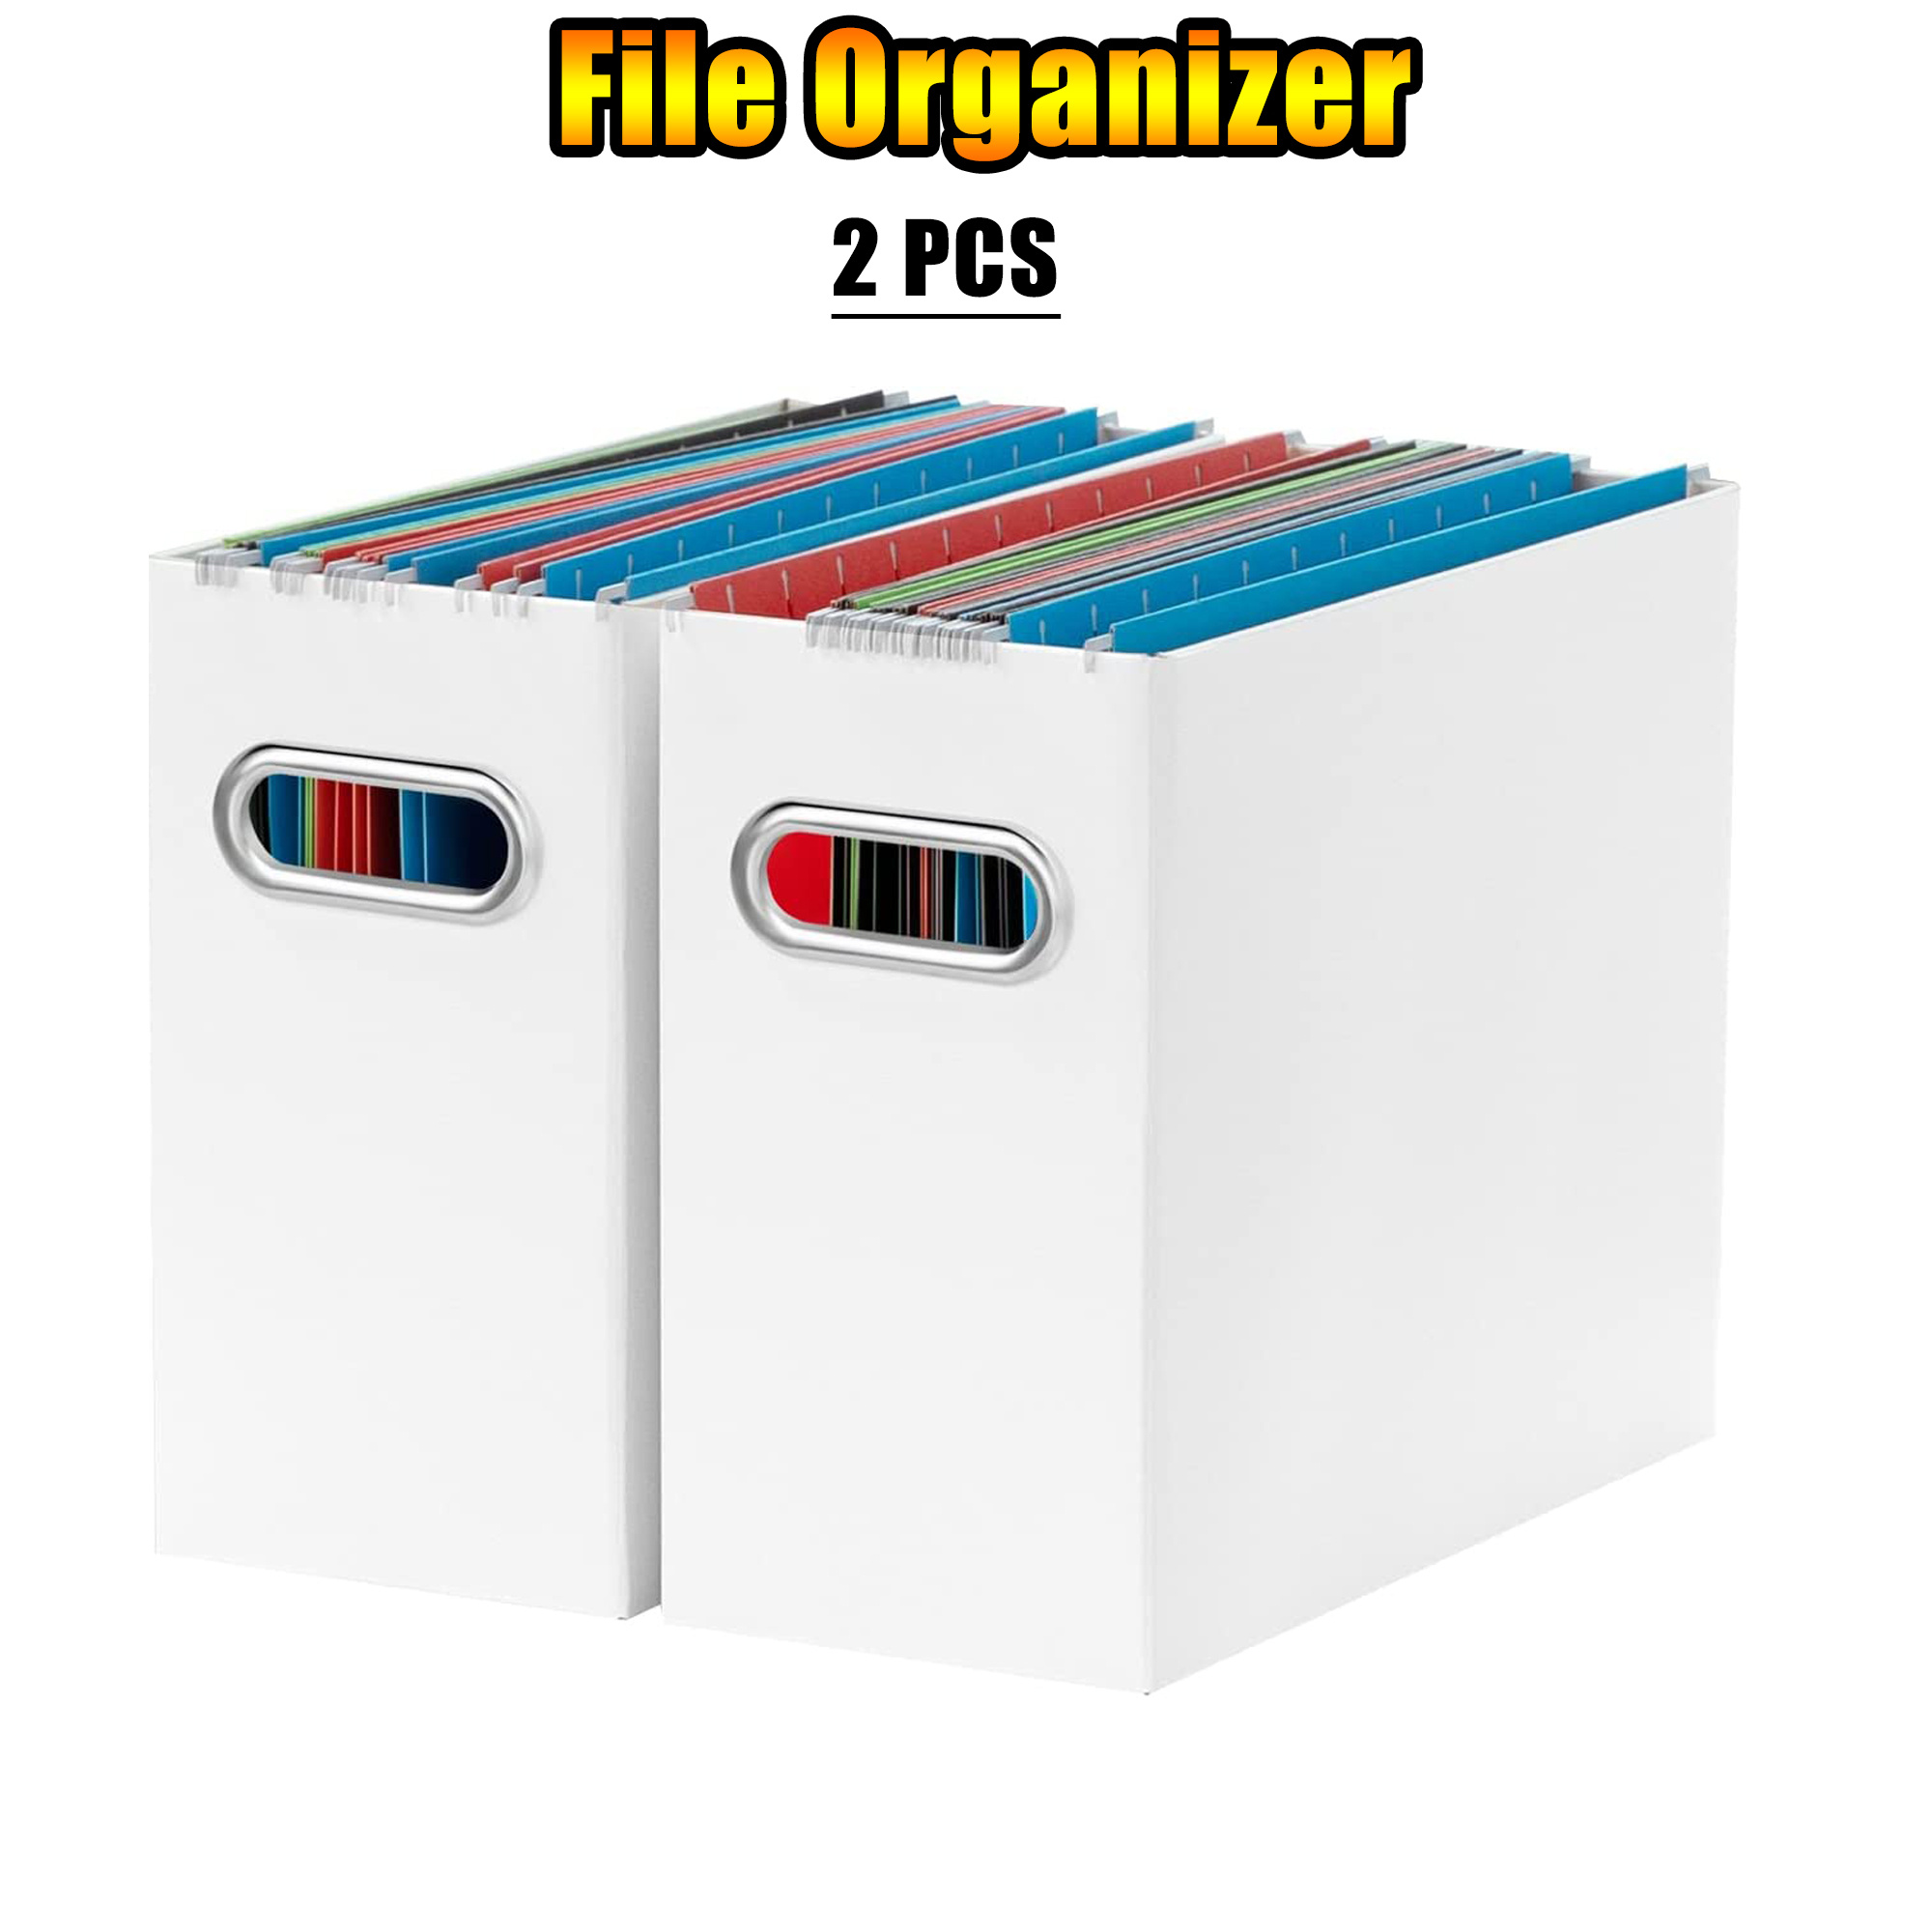 Oterri File Organizer Box, Filing Box with Lid,File Box for Letter/Legal  File Folder Storage, Portable Hanging File Box for Office/Decor/Home,1  Pack